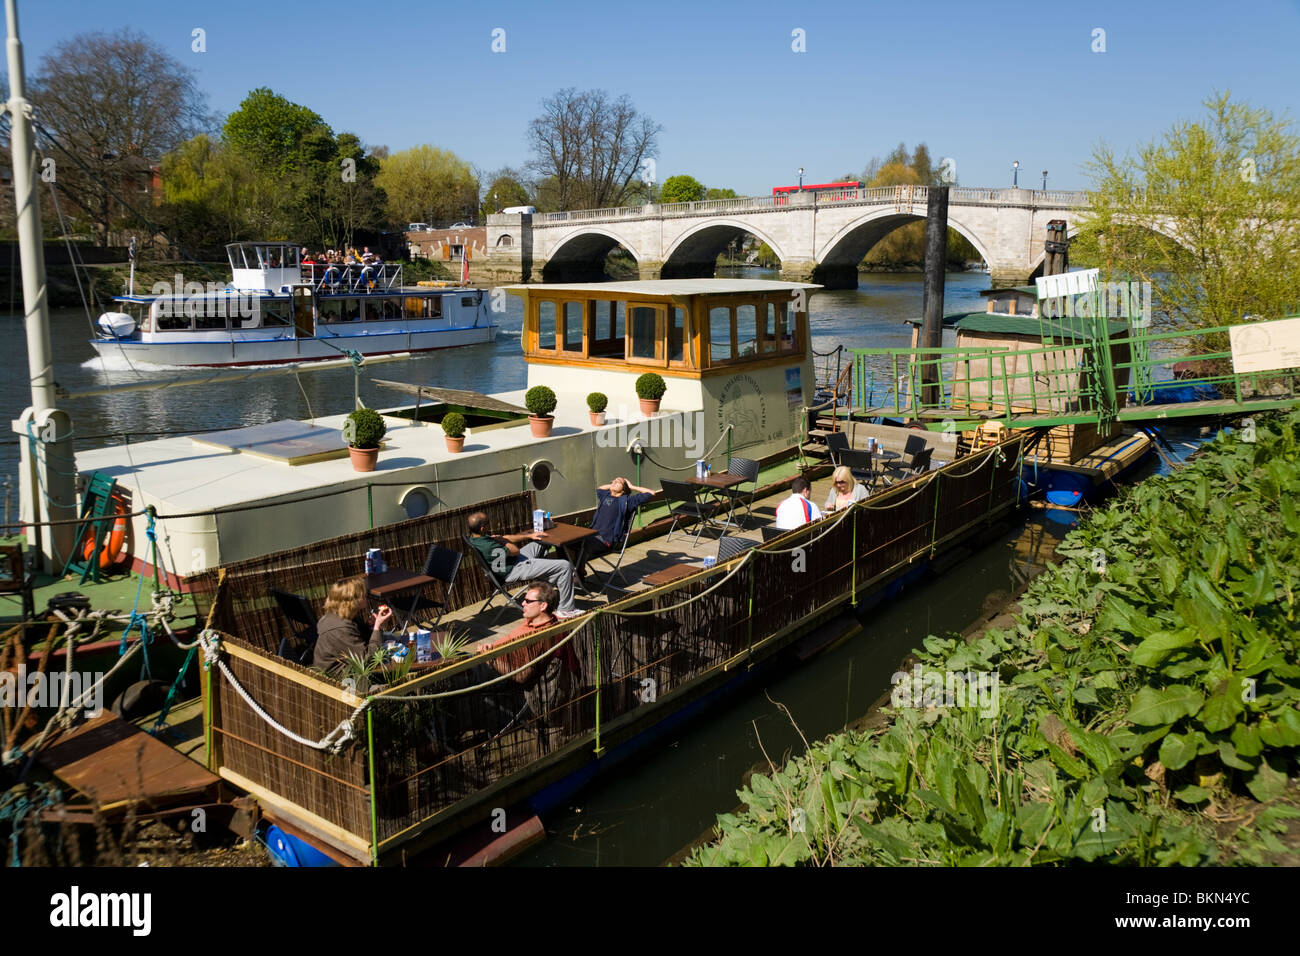 A floating boat cafe ('River Thames Visitor Centre & Cafe') moored near Richmond Bridge at Richmond upon Thames, Surrey. UK. Stock Photo